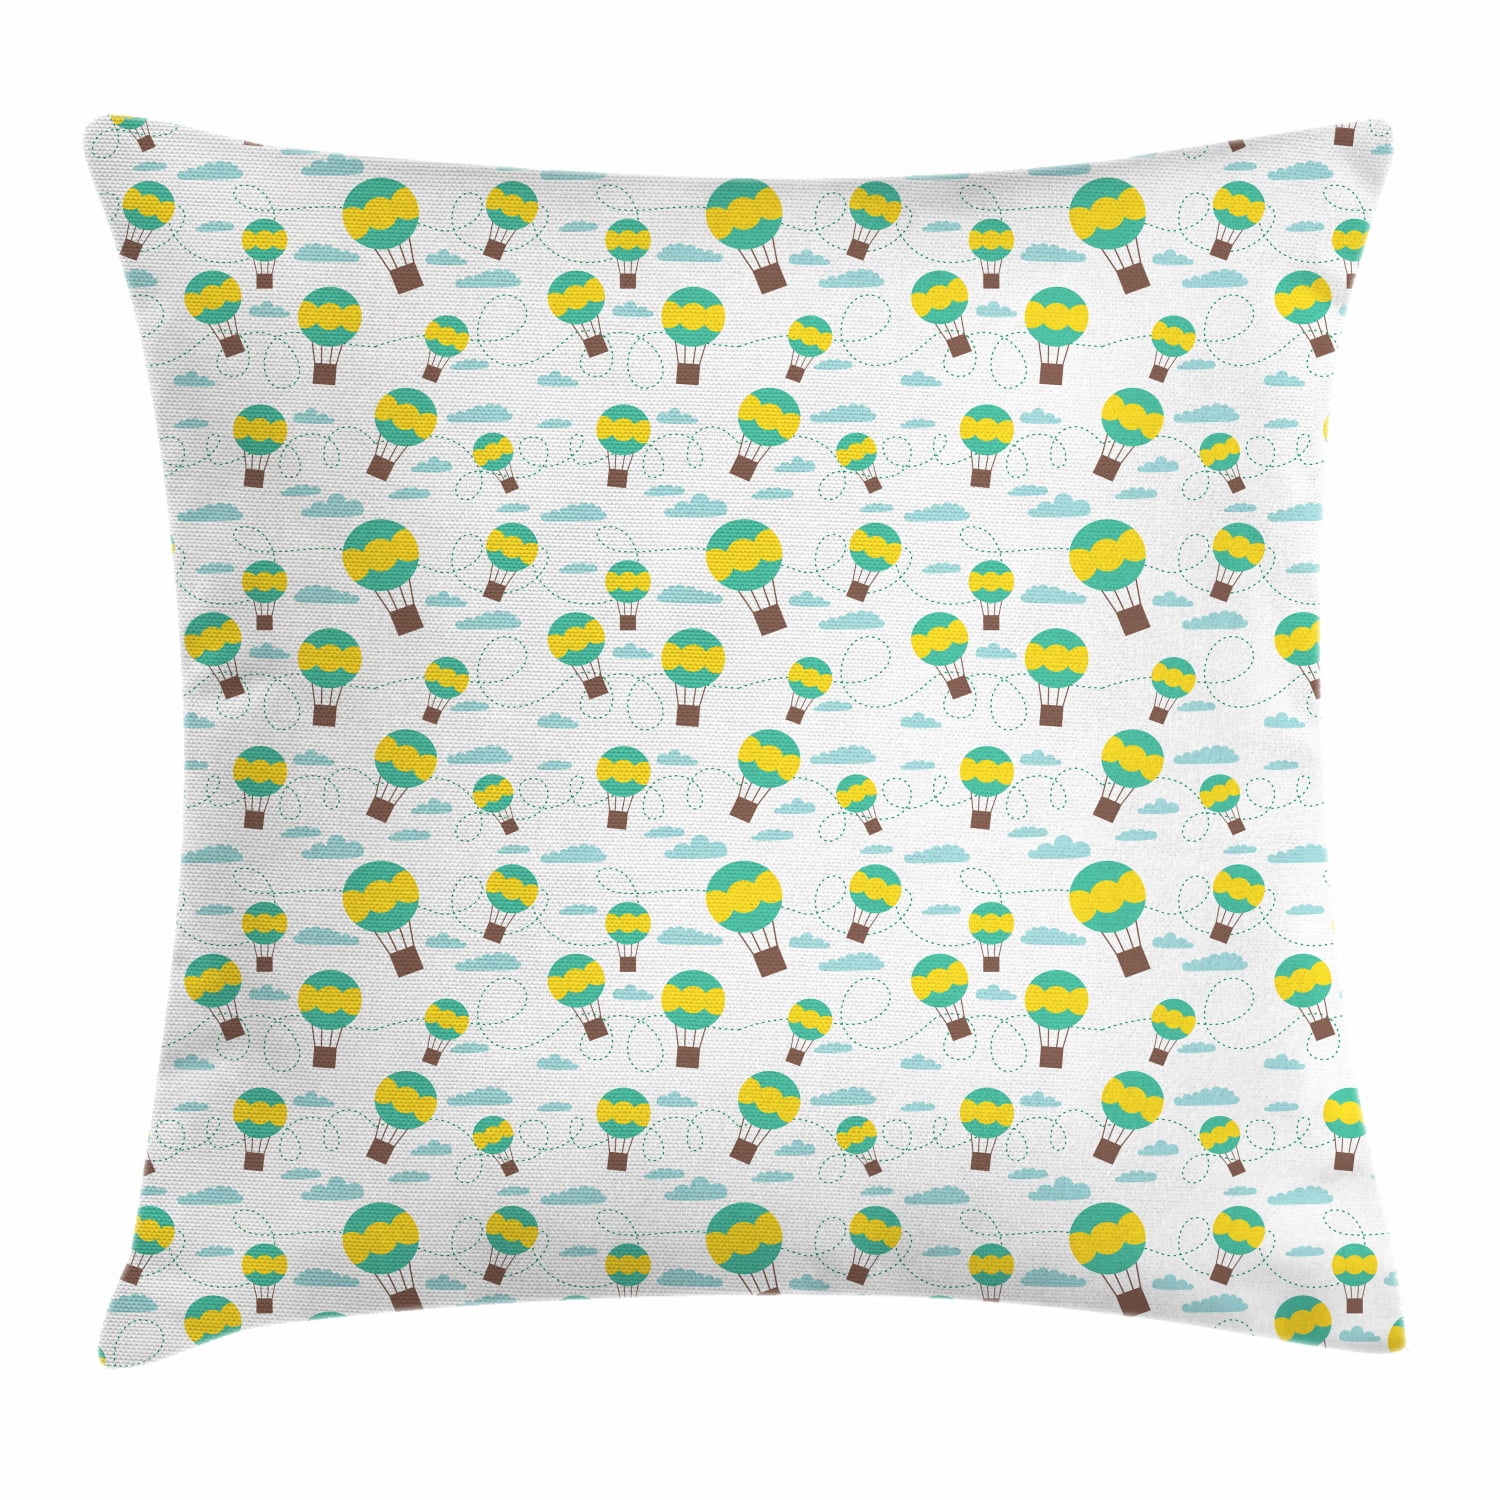 HOT AIR BALLOONS PATTERNED CUSHION AND CUSHION COVER COMPLETE ~ WITH POLKA DOTS 